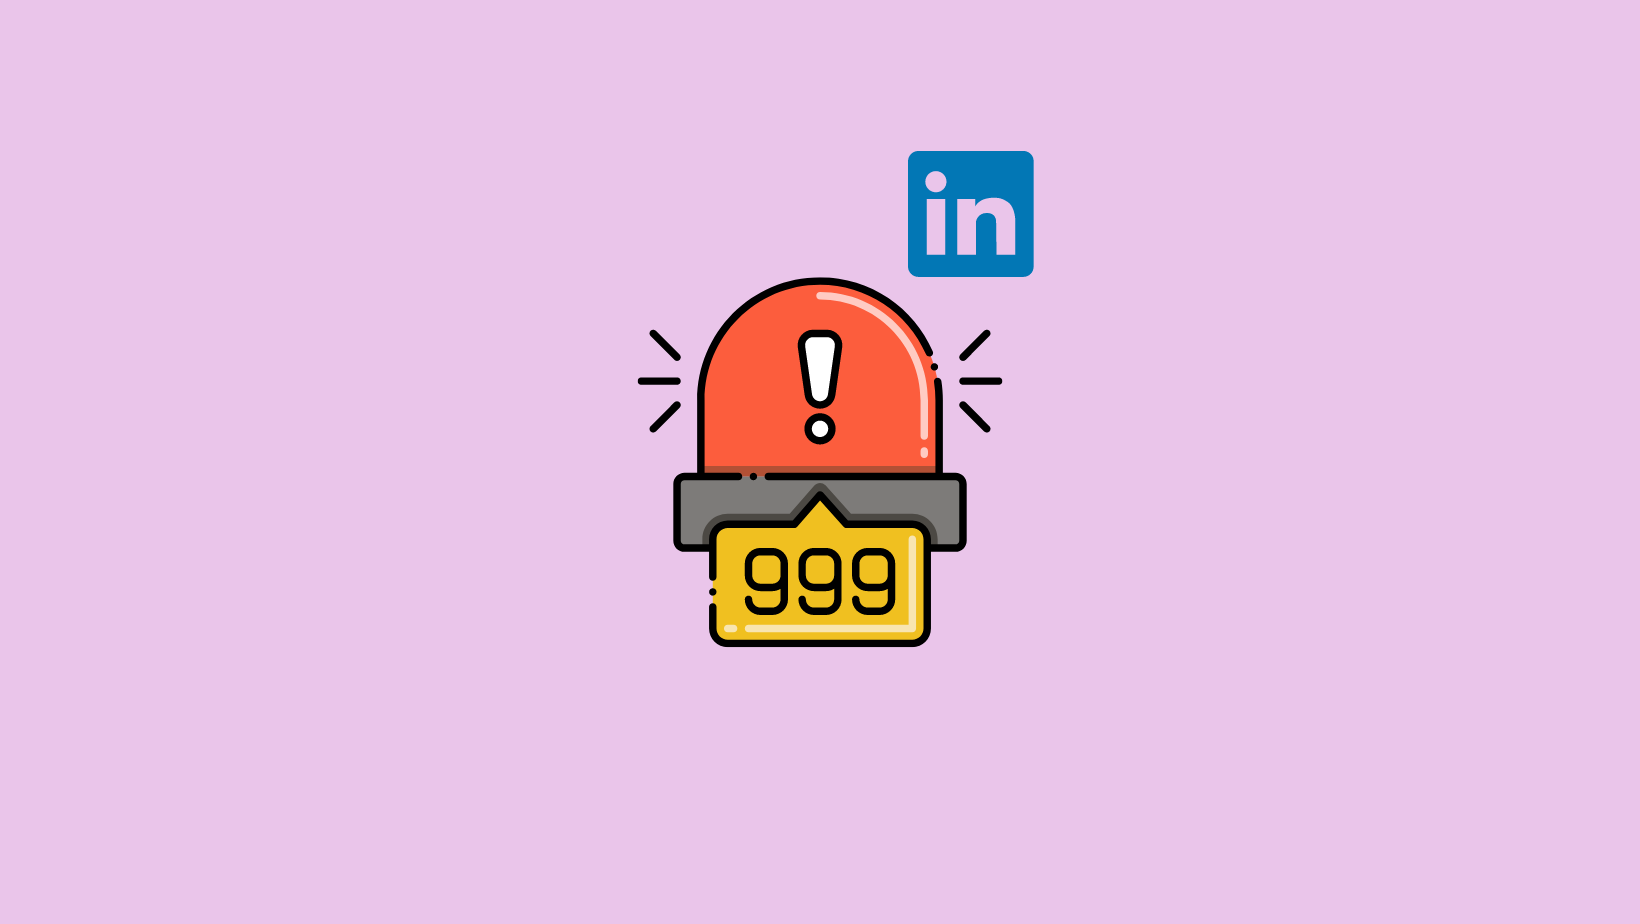 Bypass 999 response when scraping LinkedIn profile